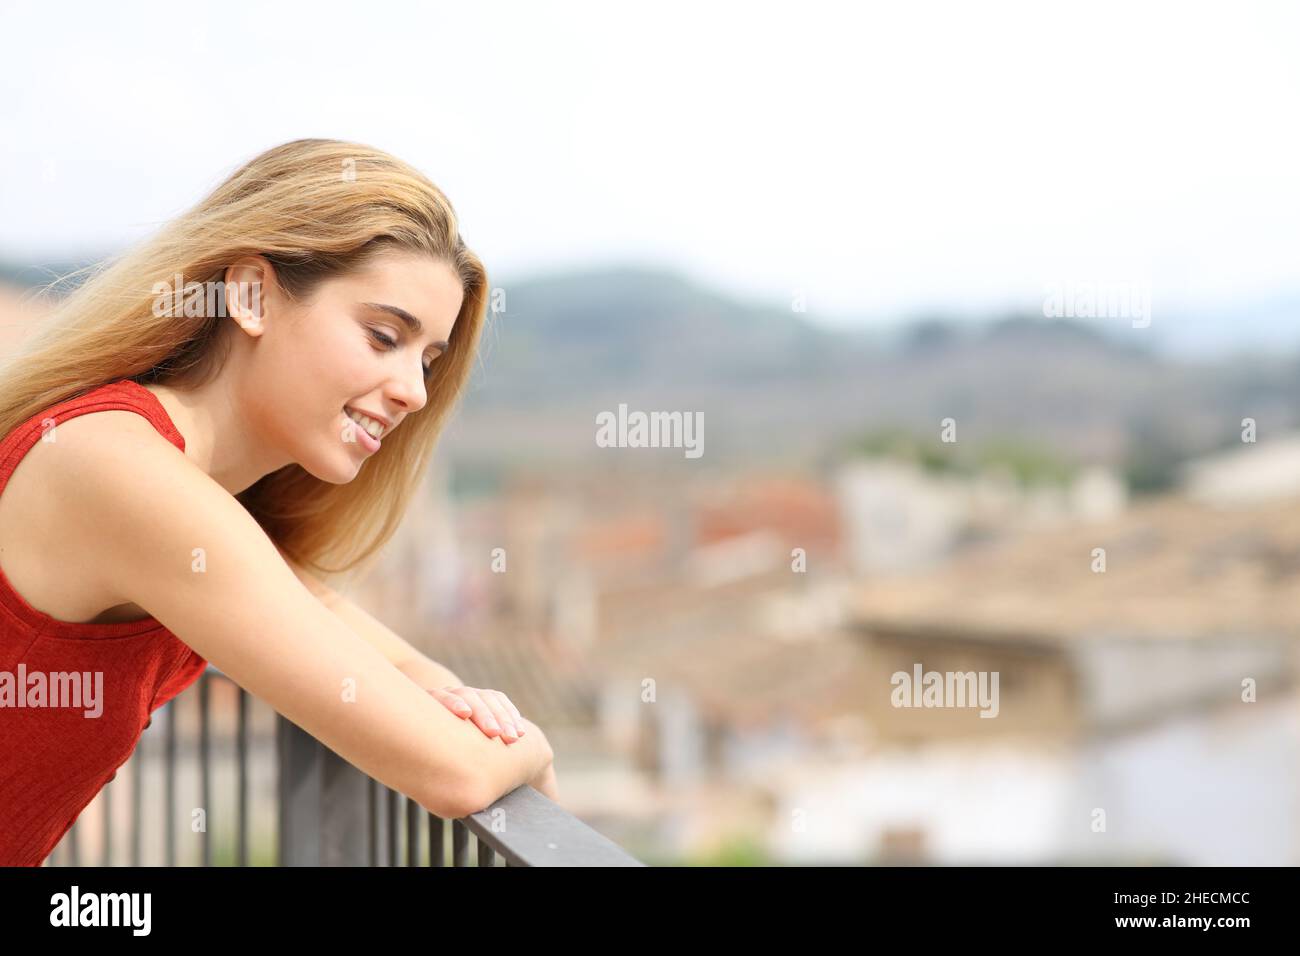 Happy woman looking down smiling in a balcony in a rural town Stock Photo